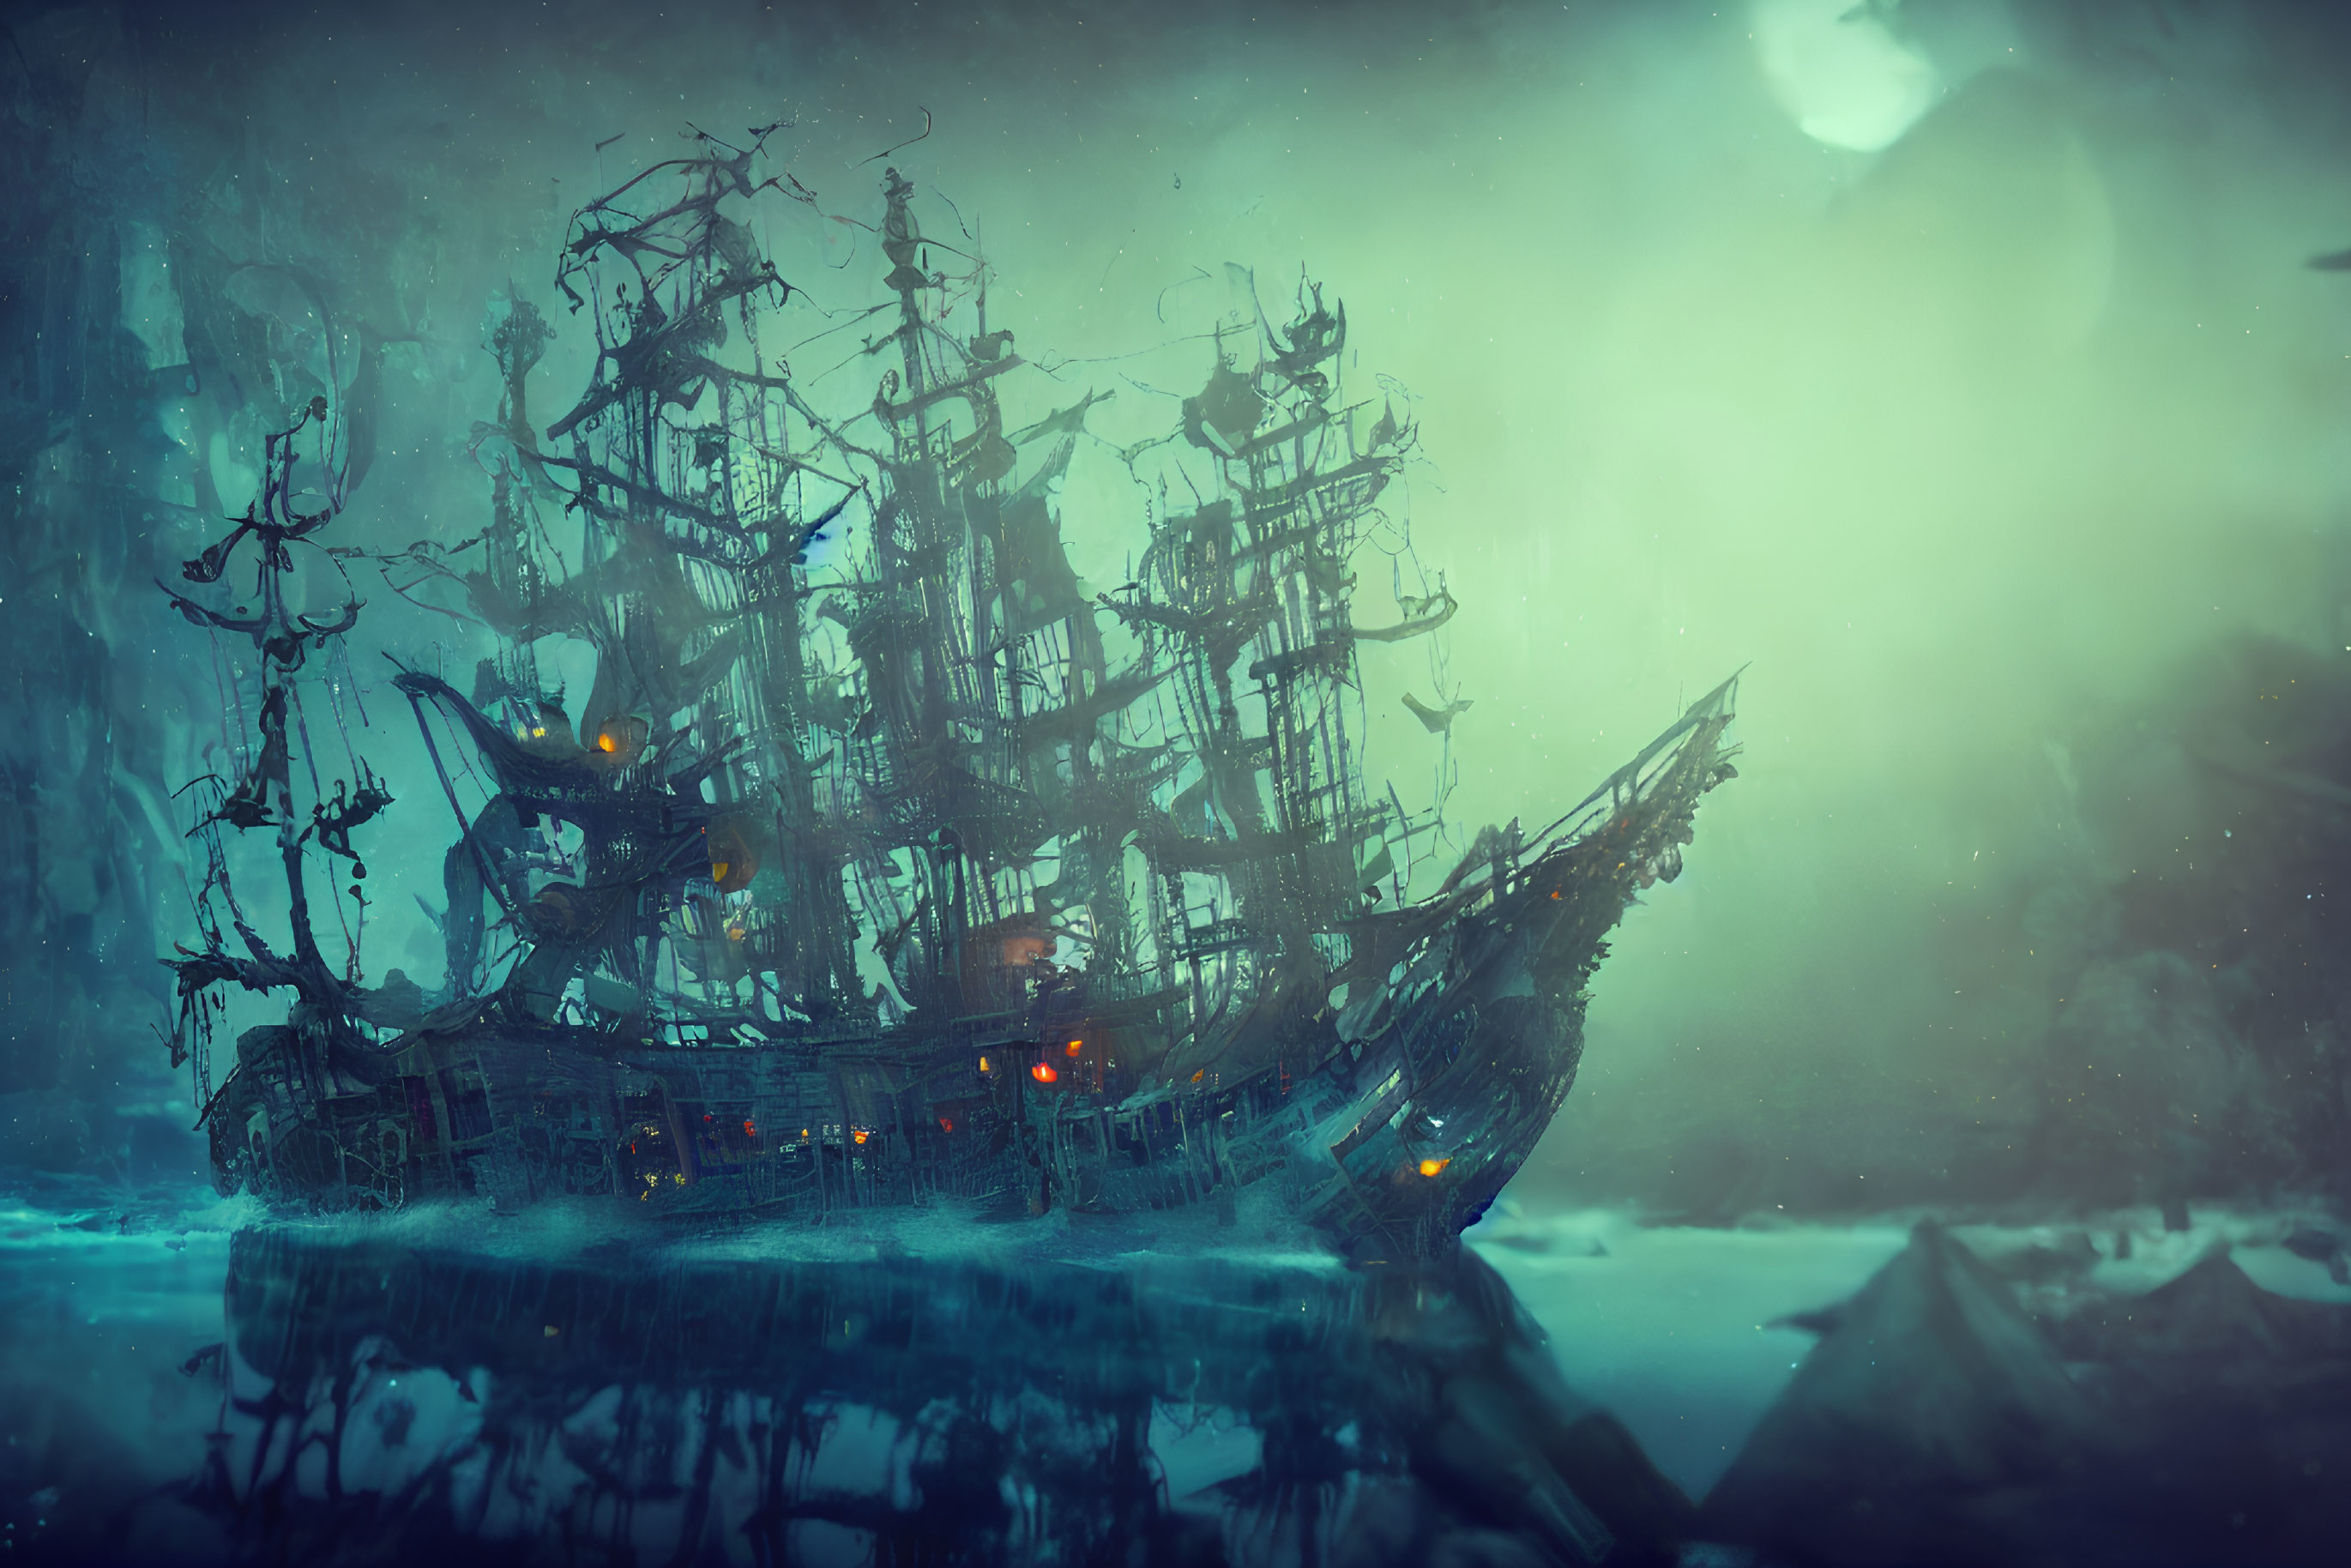 Ghostly pirate ship with tattered sails and eerie green light on icy, foggy waters